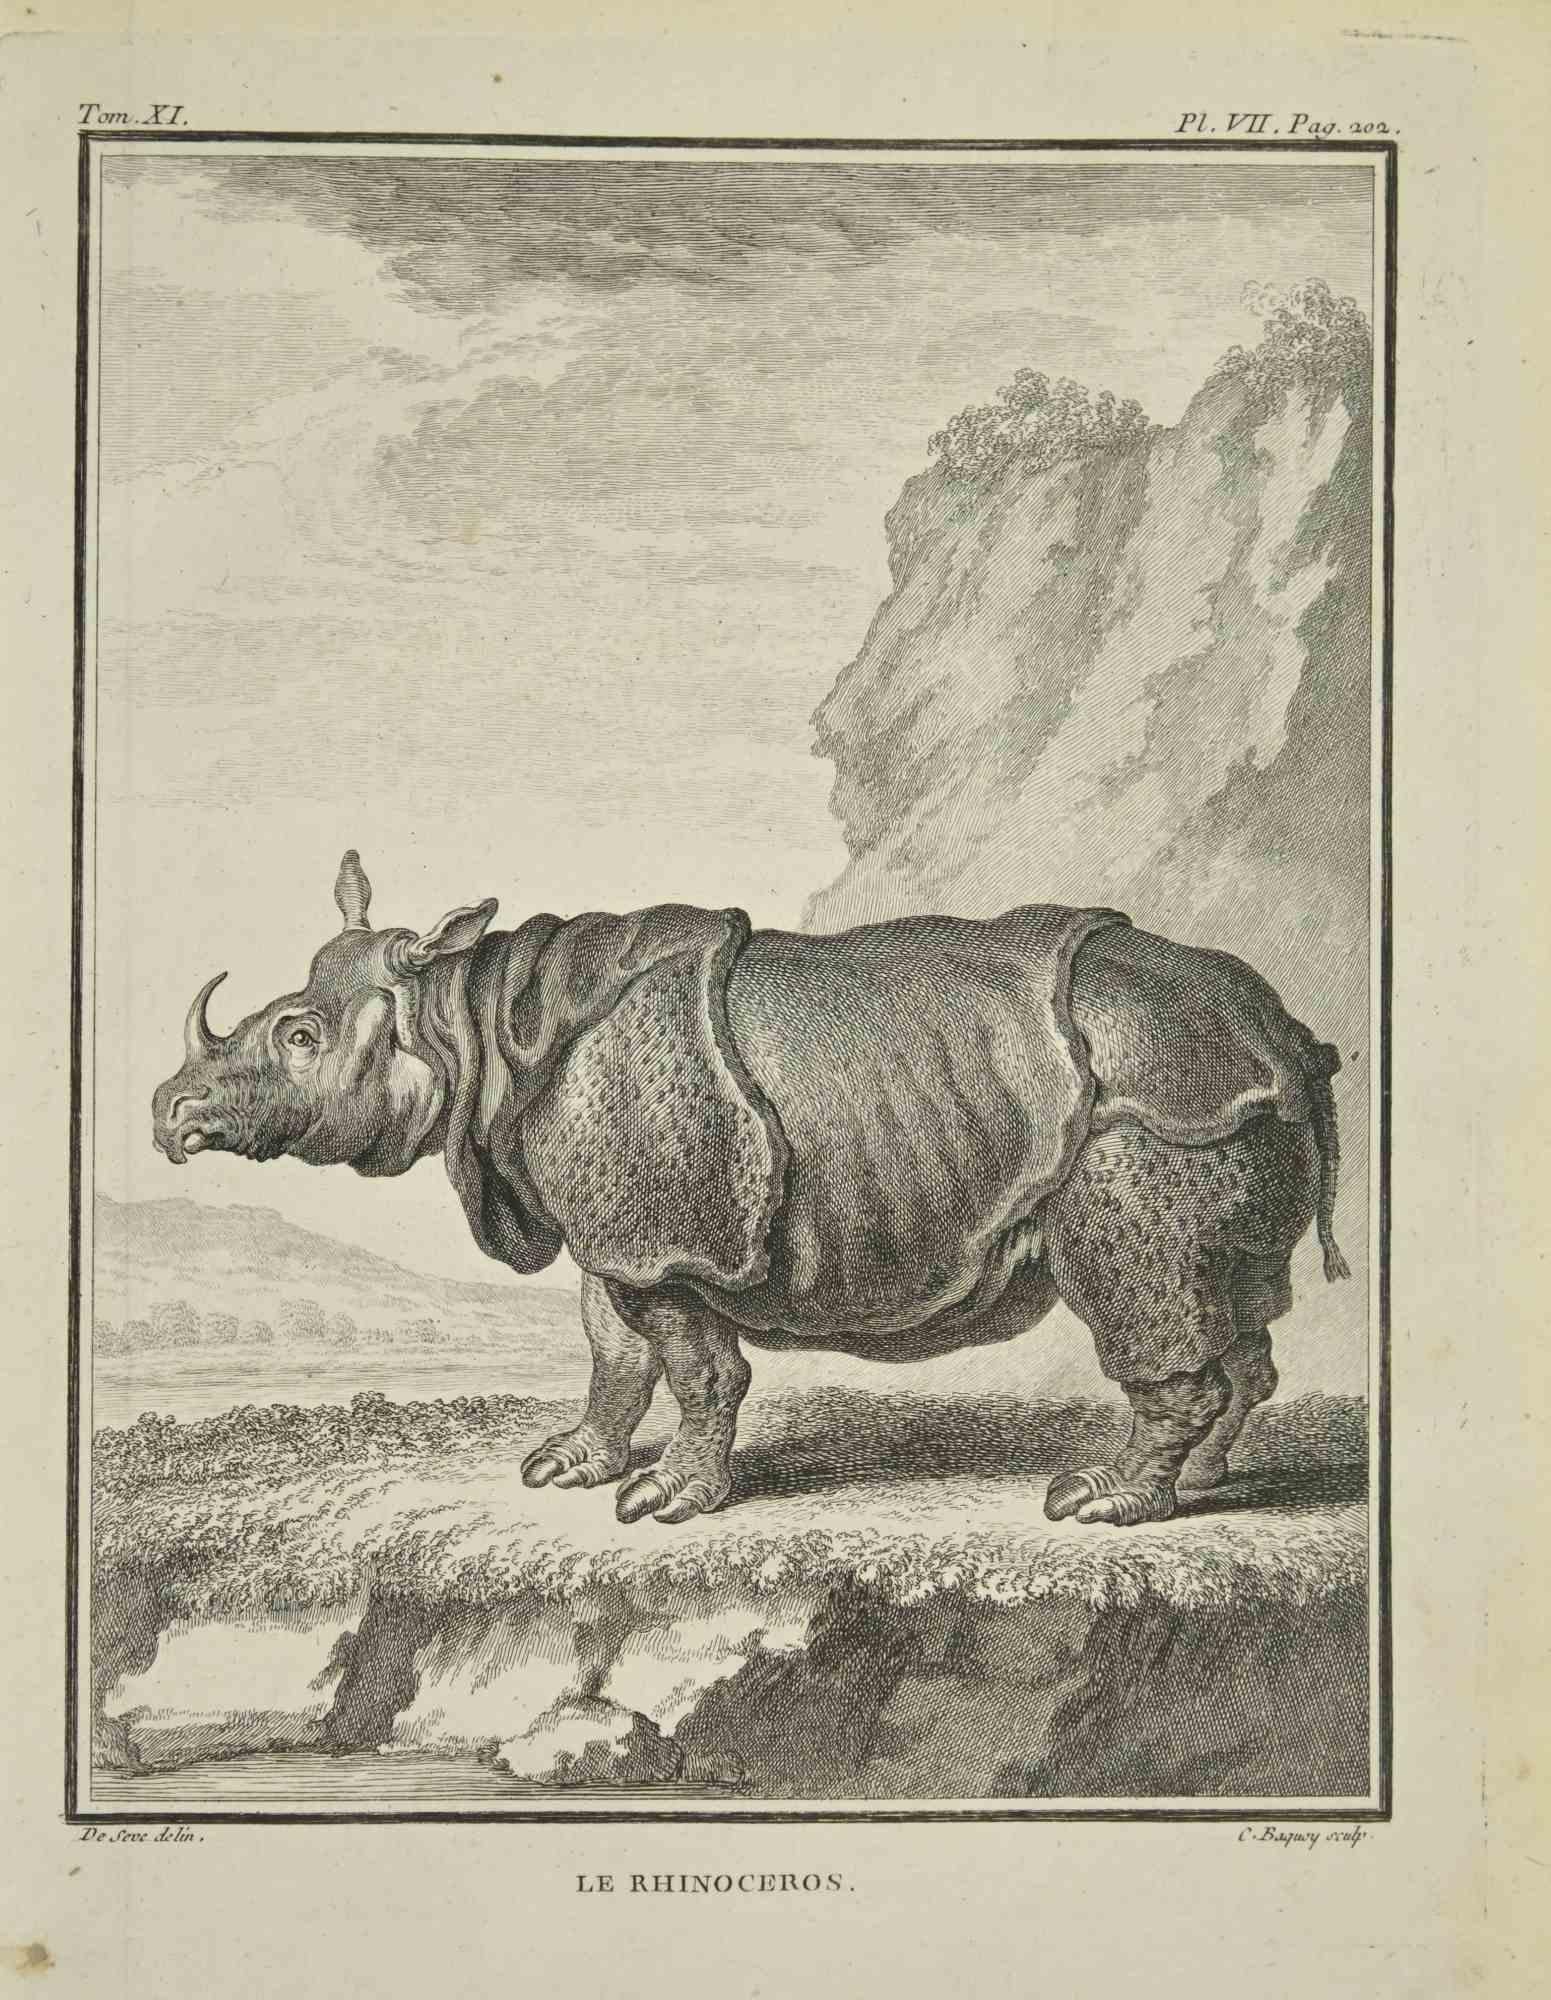 Le Rhinoceros is an etching realized by Jean Charles Baquoy in 1771.

It belongs to the suite "Histoire Naturelle de Buffon".

The Artist's signature is engraved lower right.

Good conditions with slight foxing.